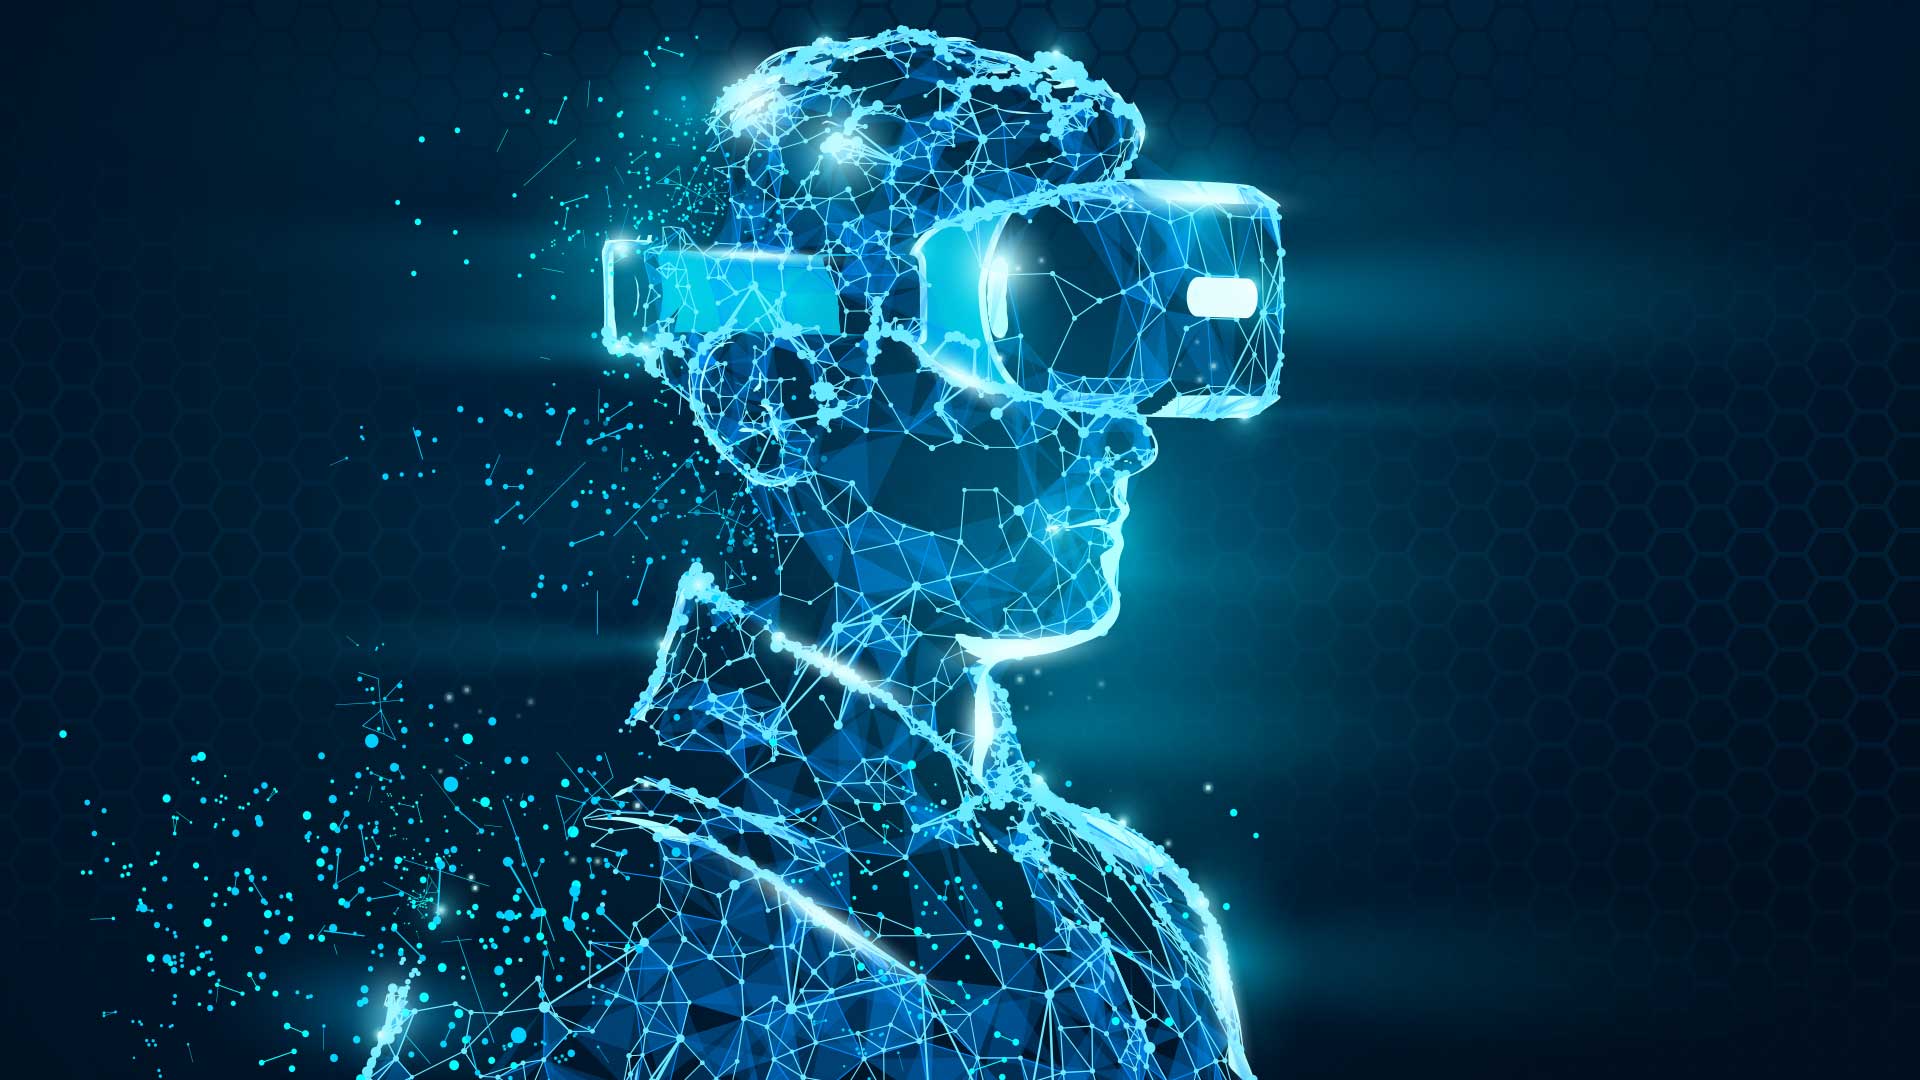 A digital illustration of a person with a virtual reality headset